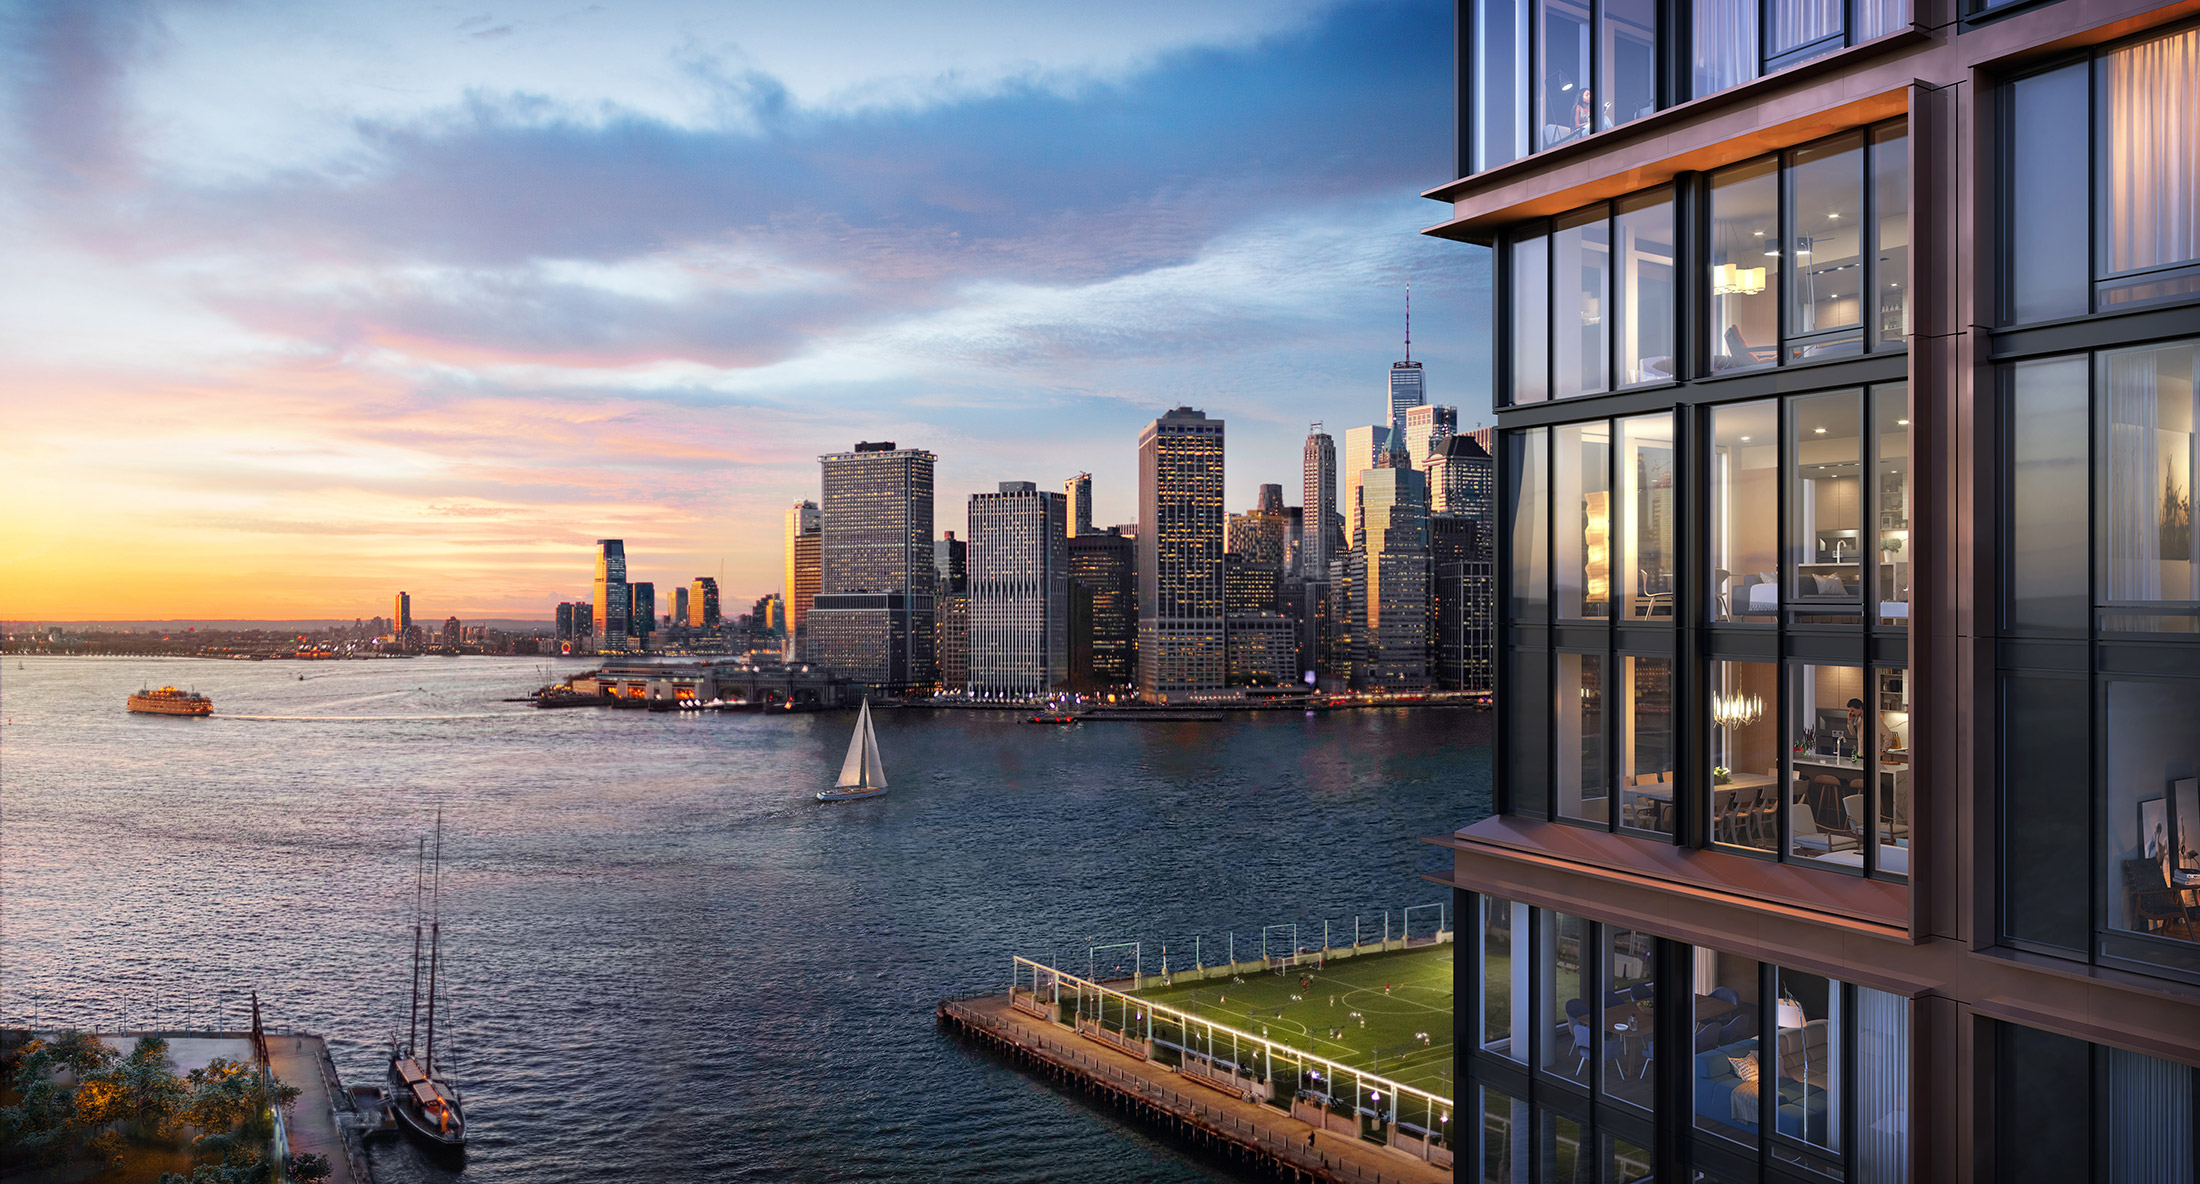 Architectural Rendering of the exterior of the The Quay Tower project located in Brooklyn Heights, New York